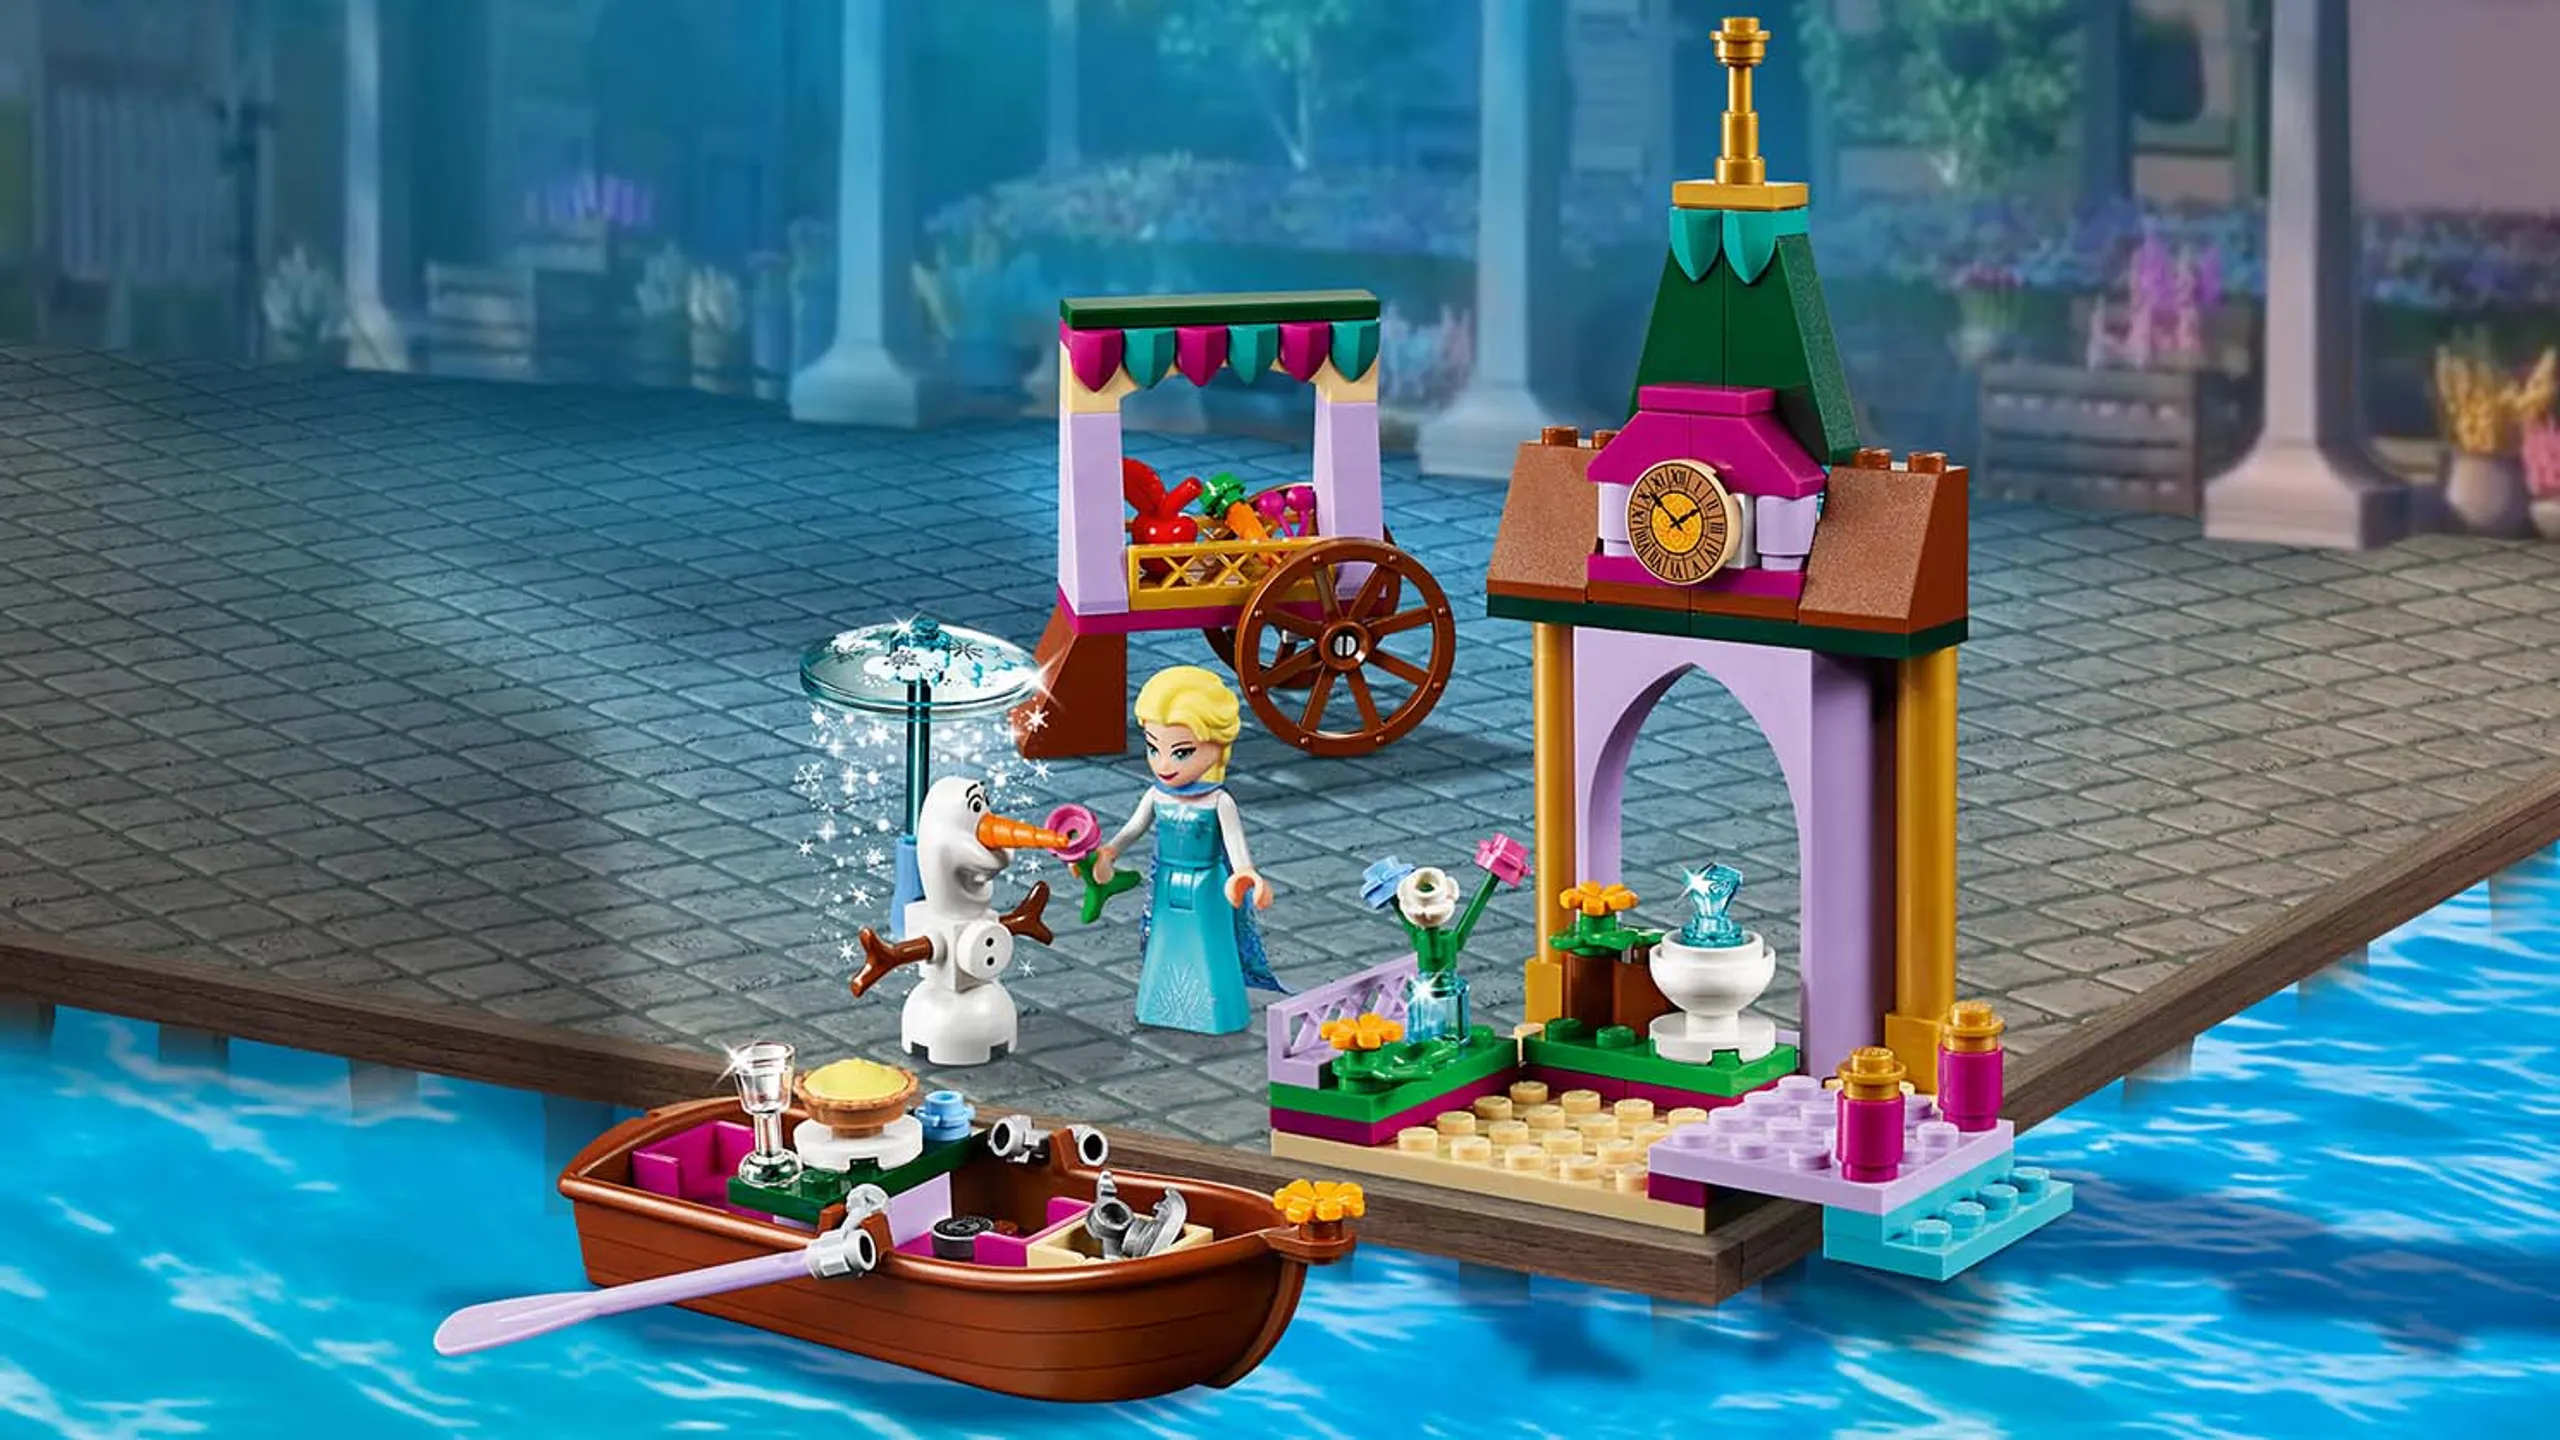 LEGO Disney - 41155 Elsa's Market Adventure - Elsa enjoys a summer day on the Arendelle Market Place shopping for vegetables together with Olaf who stays cold under his snow flurry.